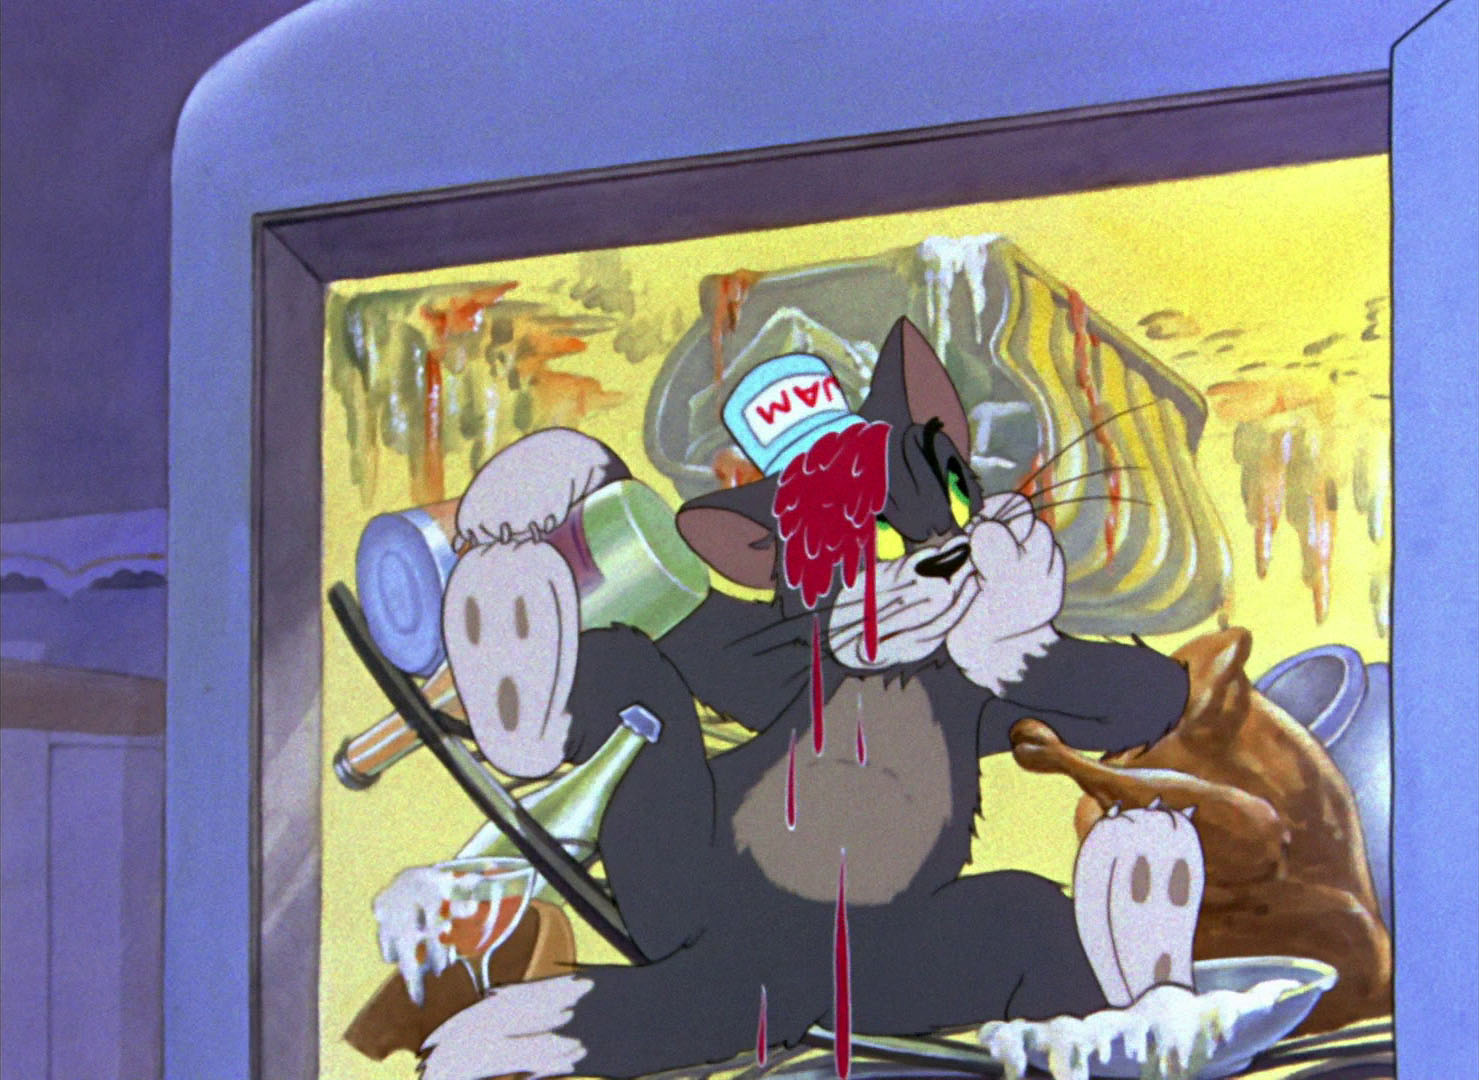 Tom & Jerry Pictures: "The Midnight Snack" - Wake Up I Want A Midnight Snack Comic